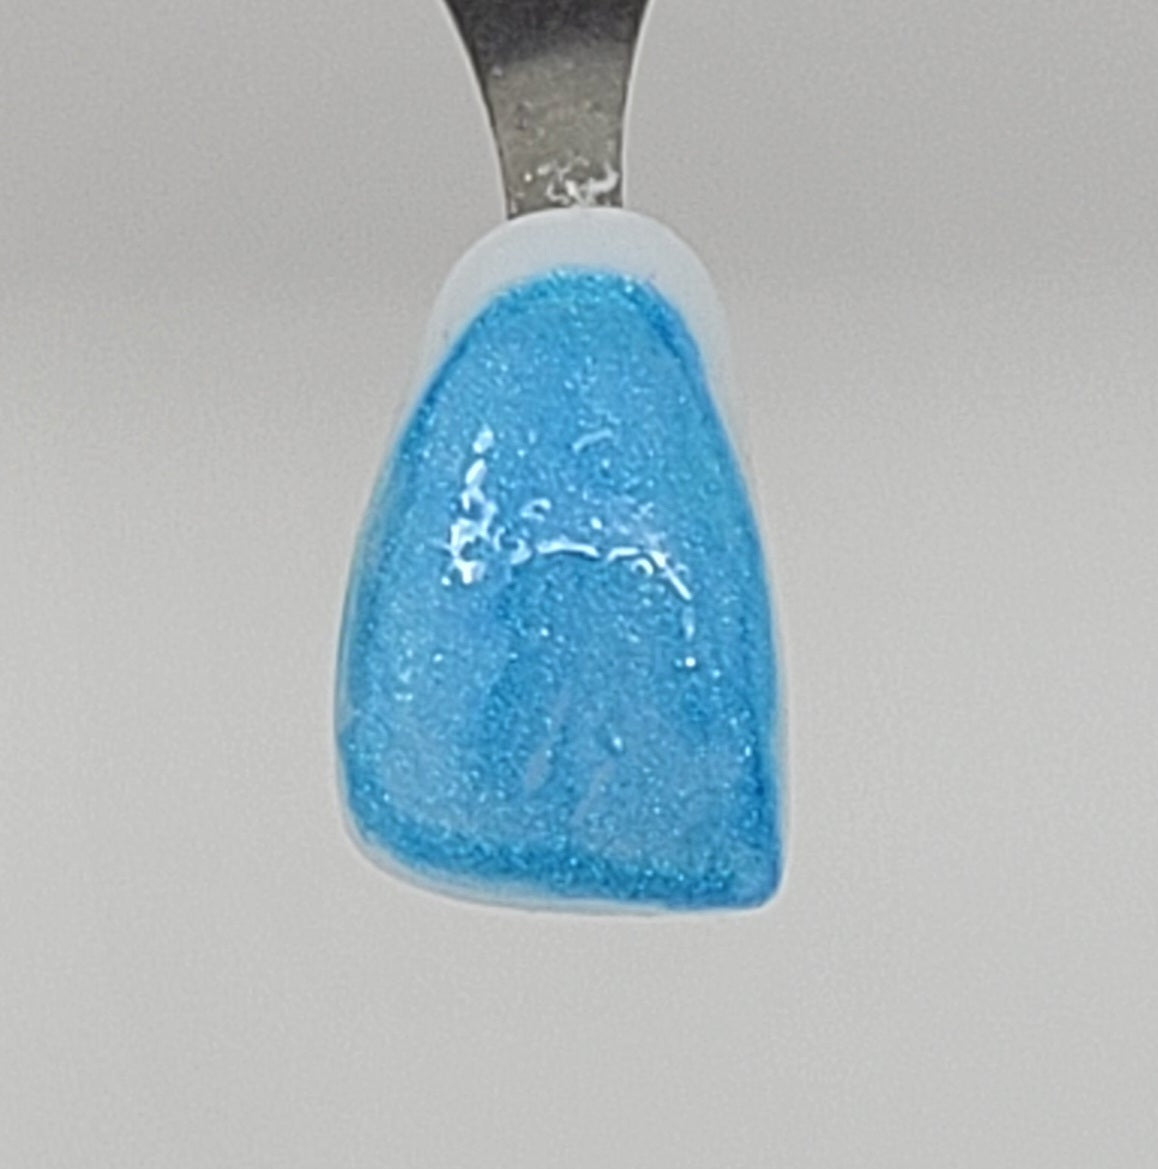 Light blue Temporary Tattooth Colorant on a demo tooth.  These colorants can be applied to teeth to temporarily alter their color or iridescence.